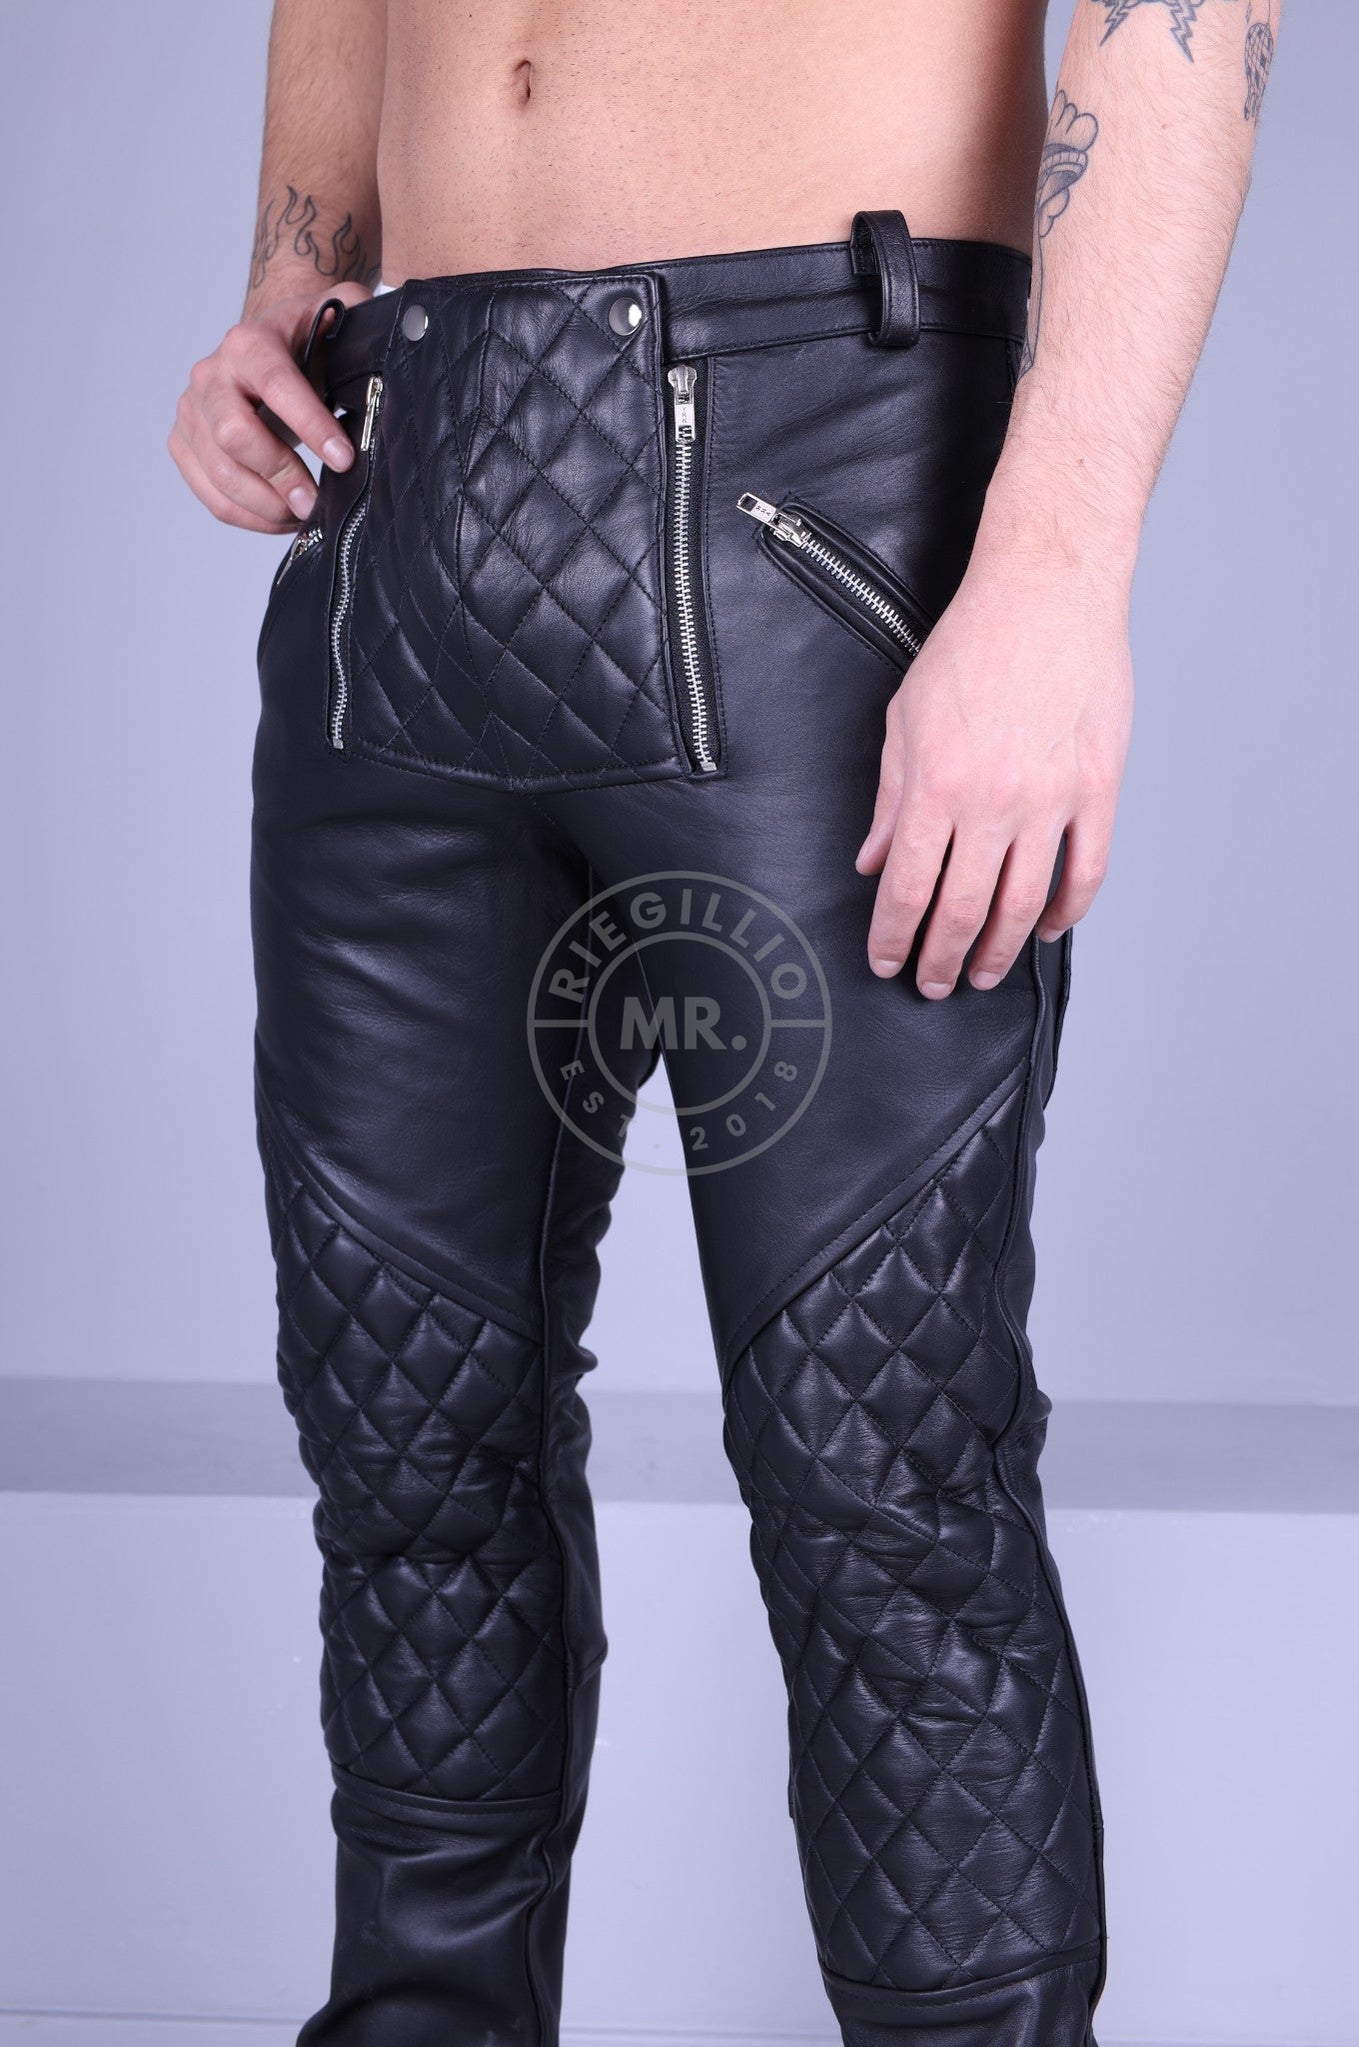 Leather Padded Front Zipper Pants at MR. Riegillio